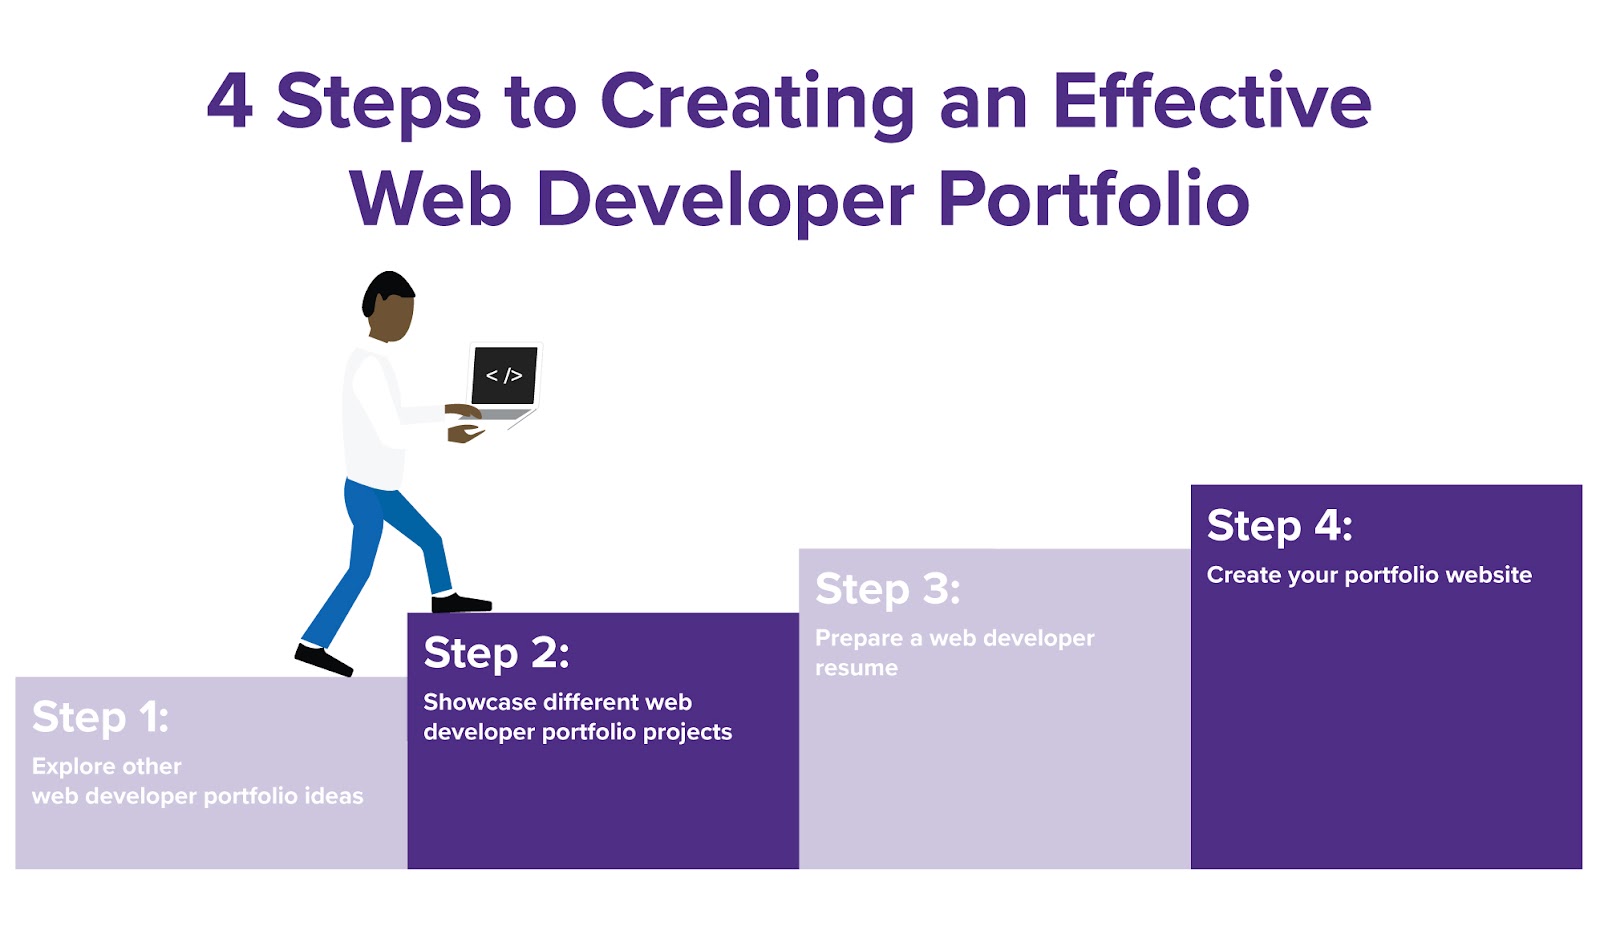 An image depicting the four steps to creating an effective web designer portfolio.